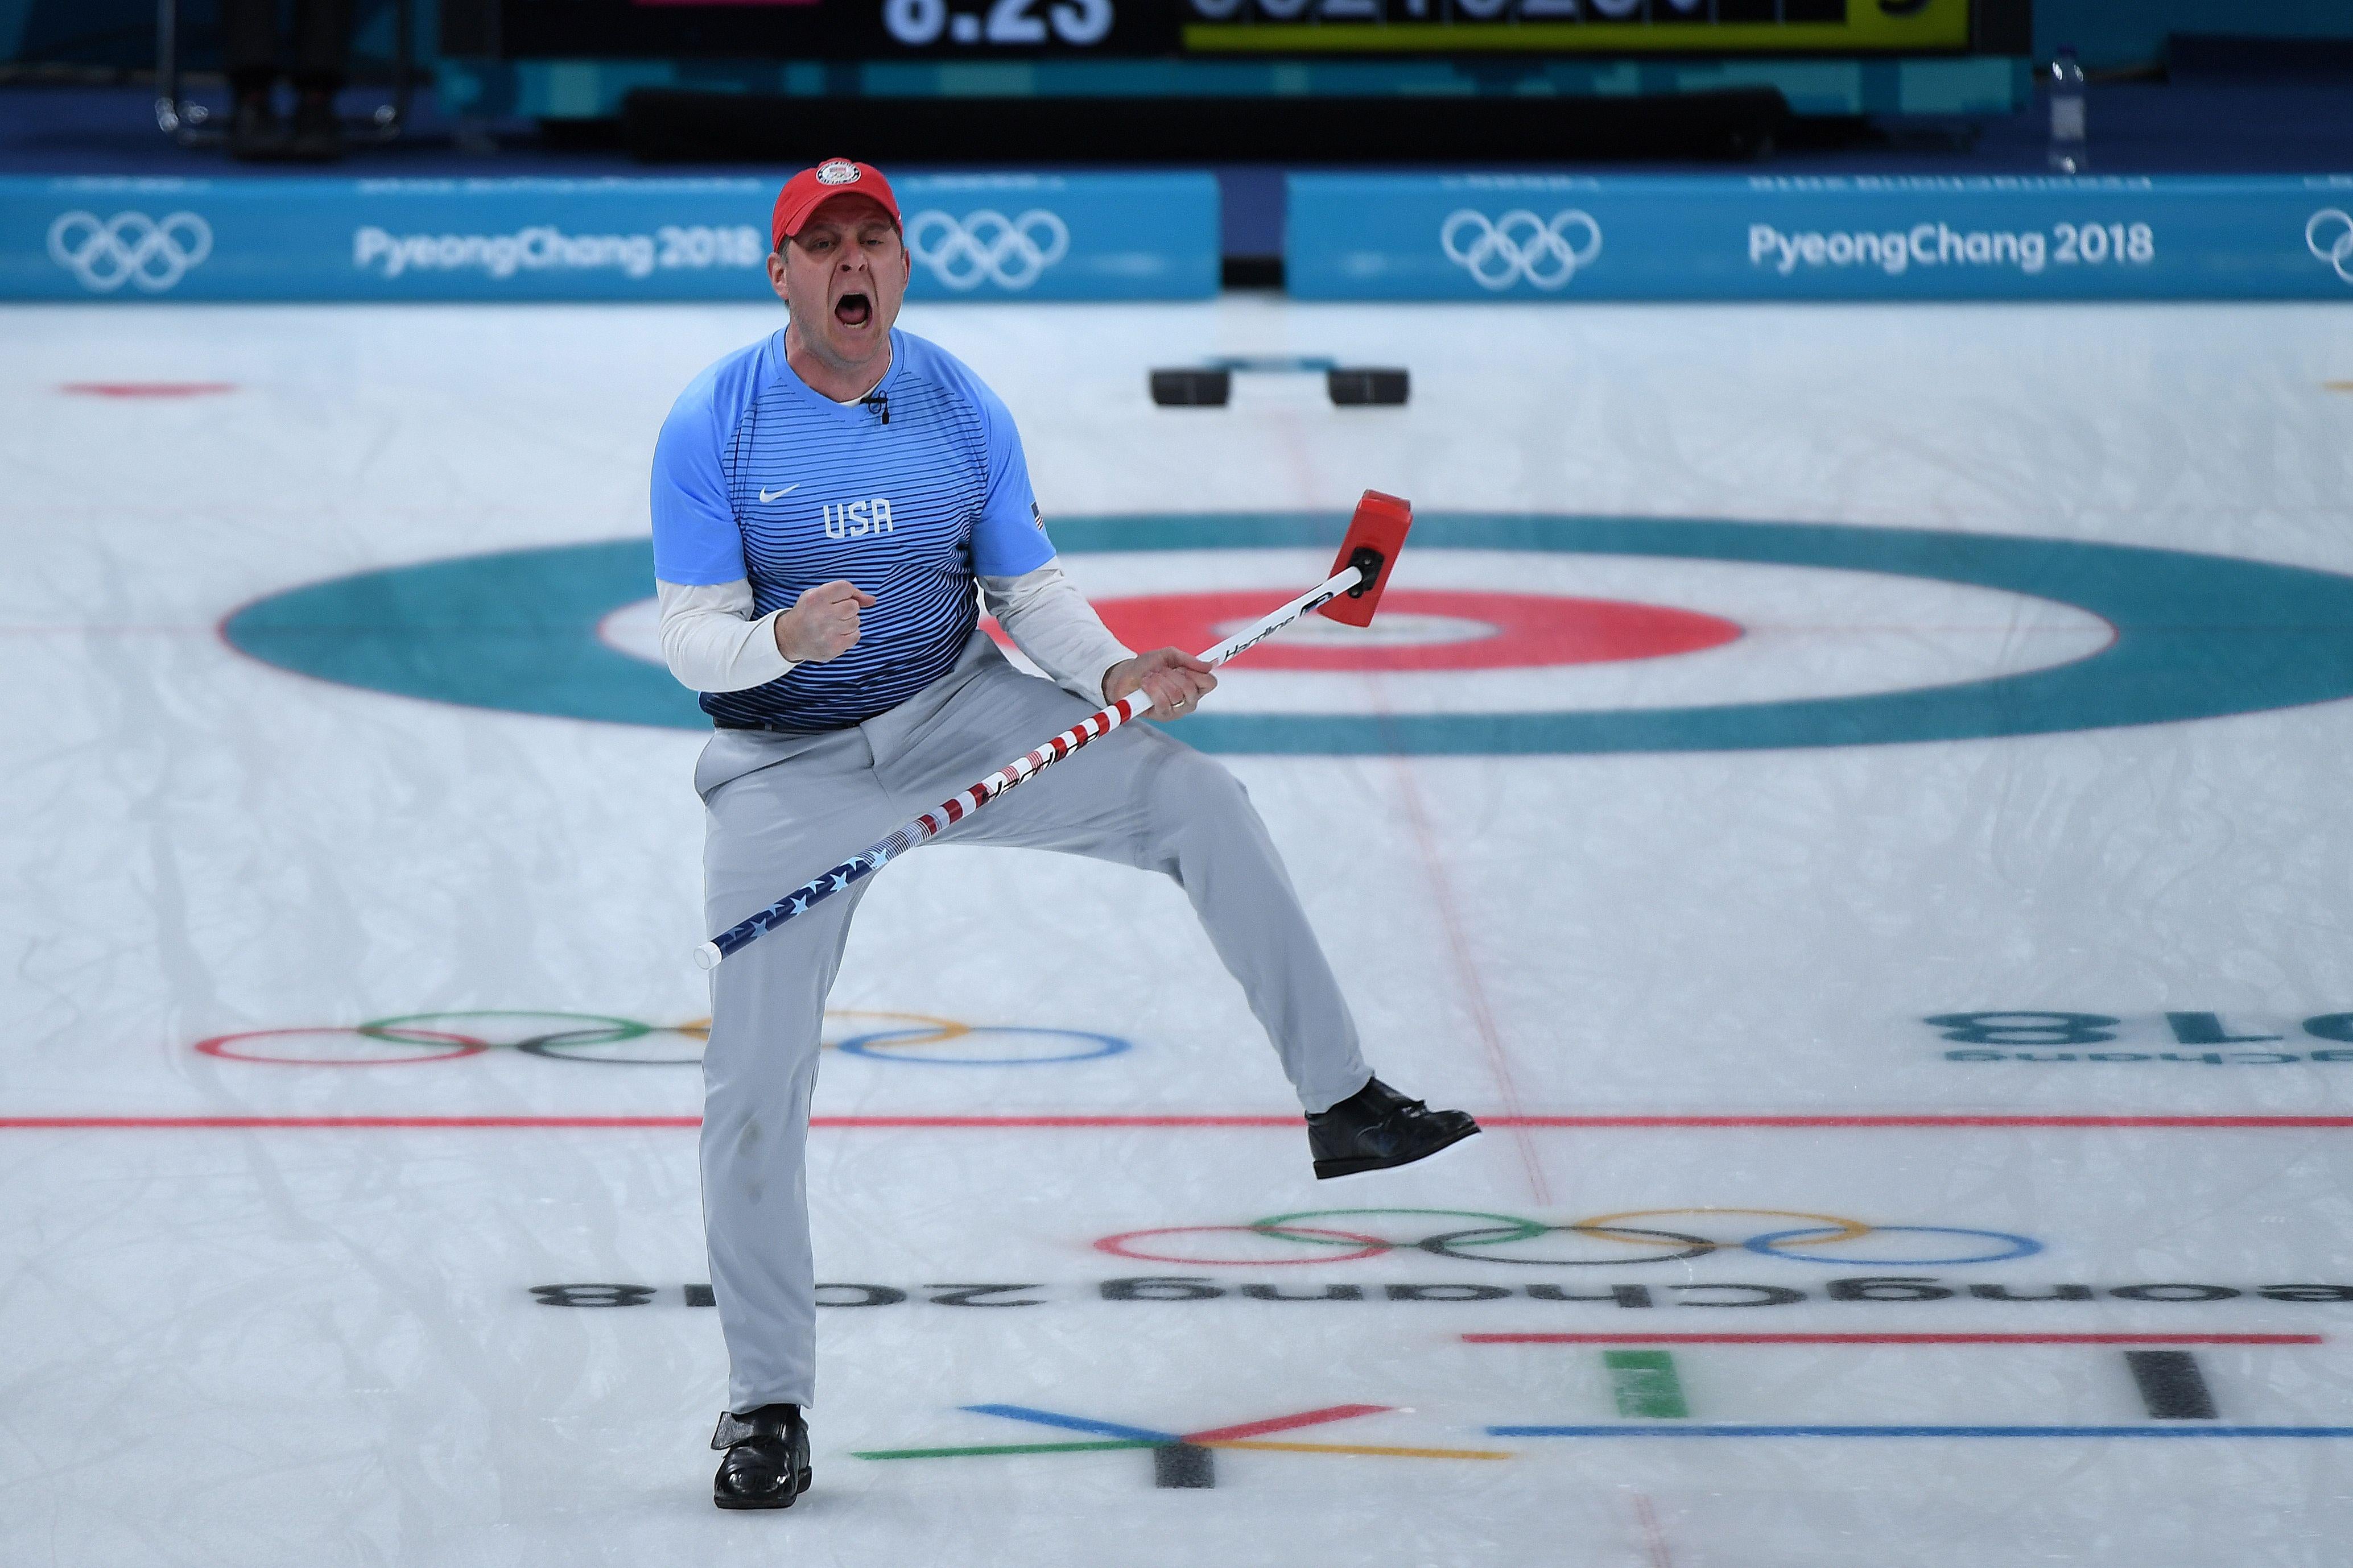 John Shuster, holding his curling broom, stands on one leg and yells in triumph.